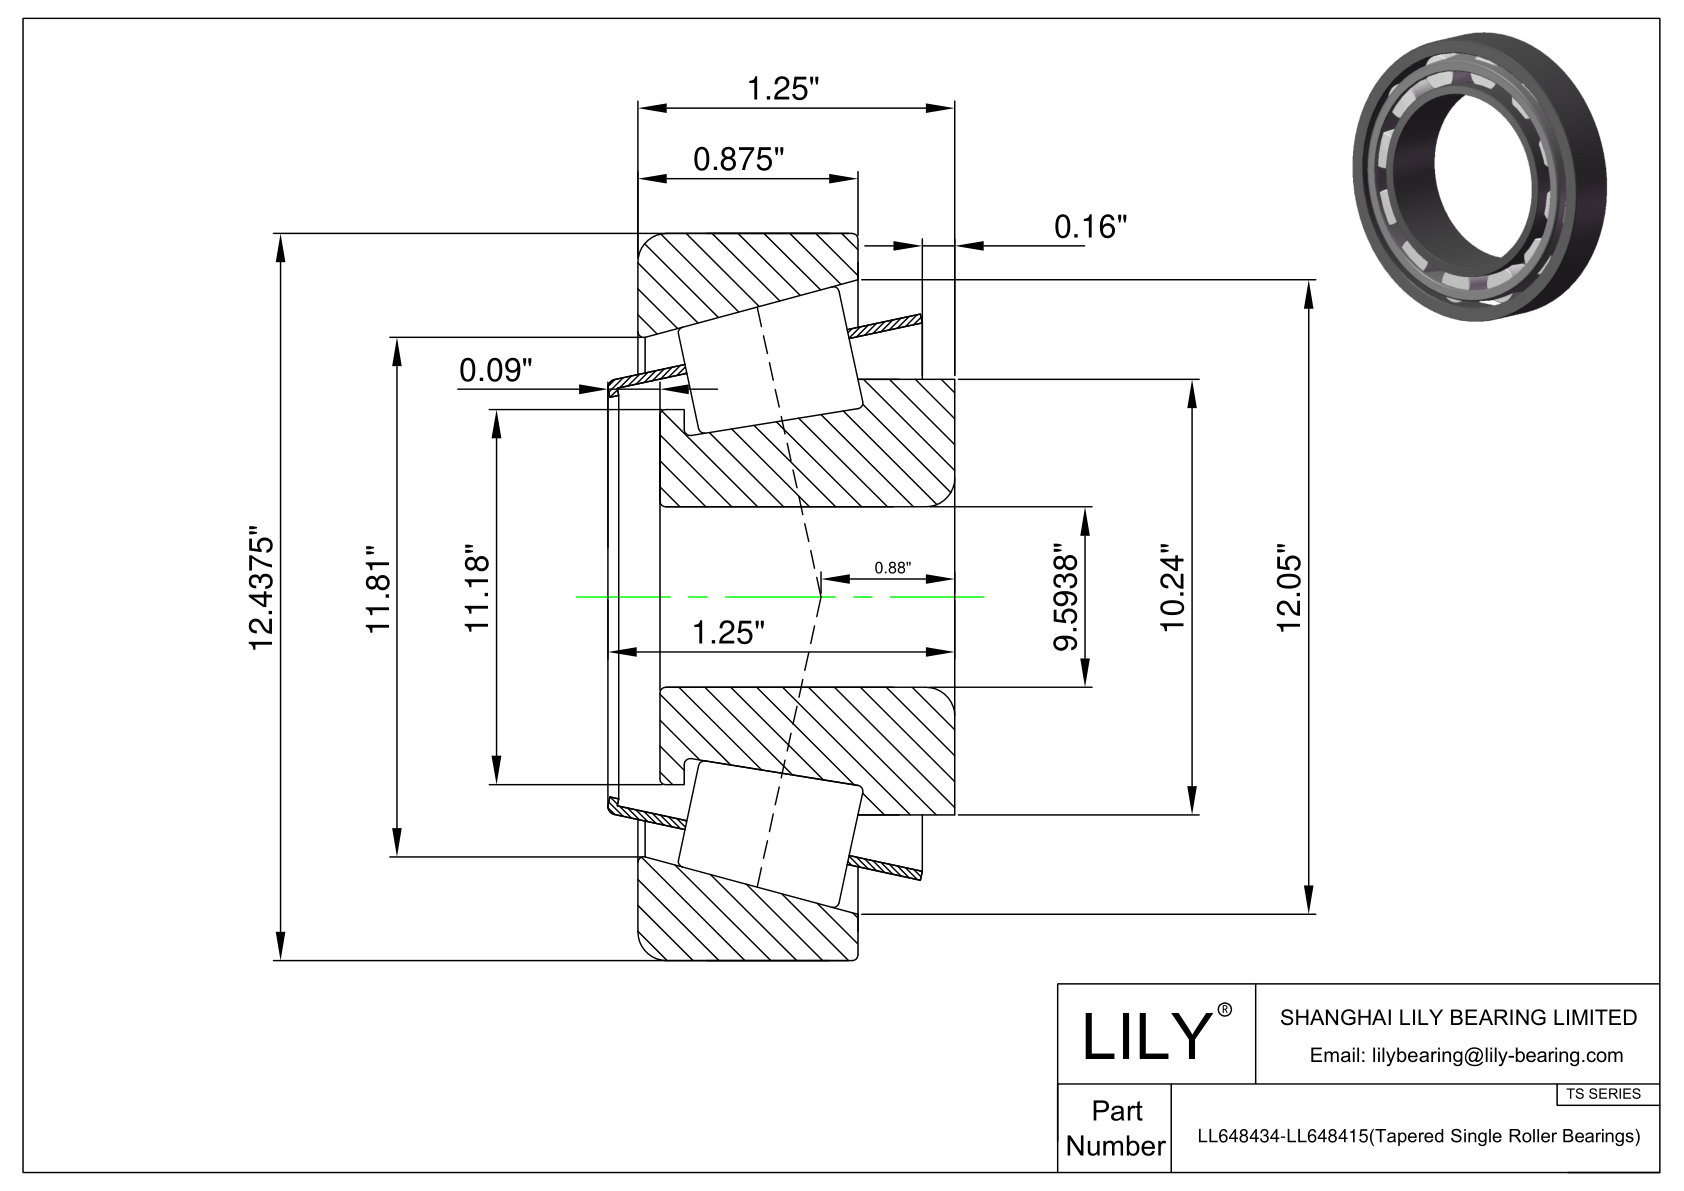 LL648434-LL648415 TS (Tapered Single Roller Bearings) (Imperial) cad drawing